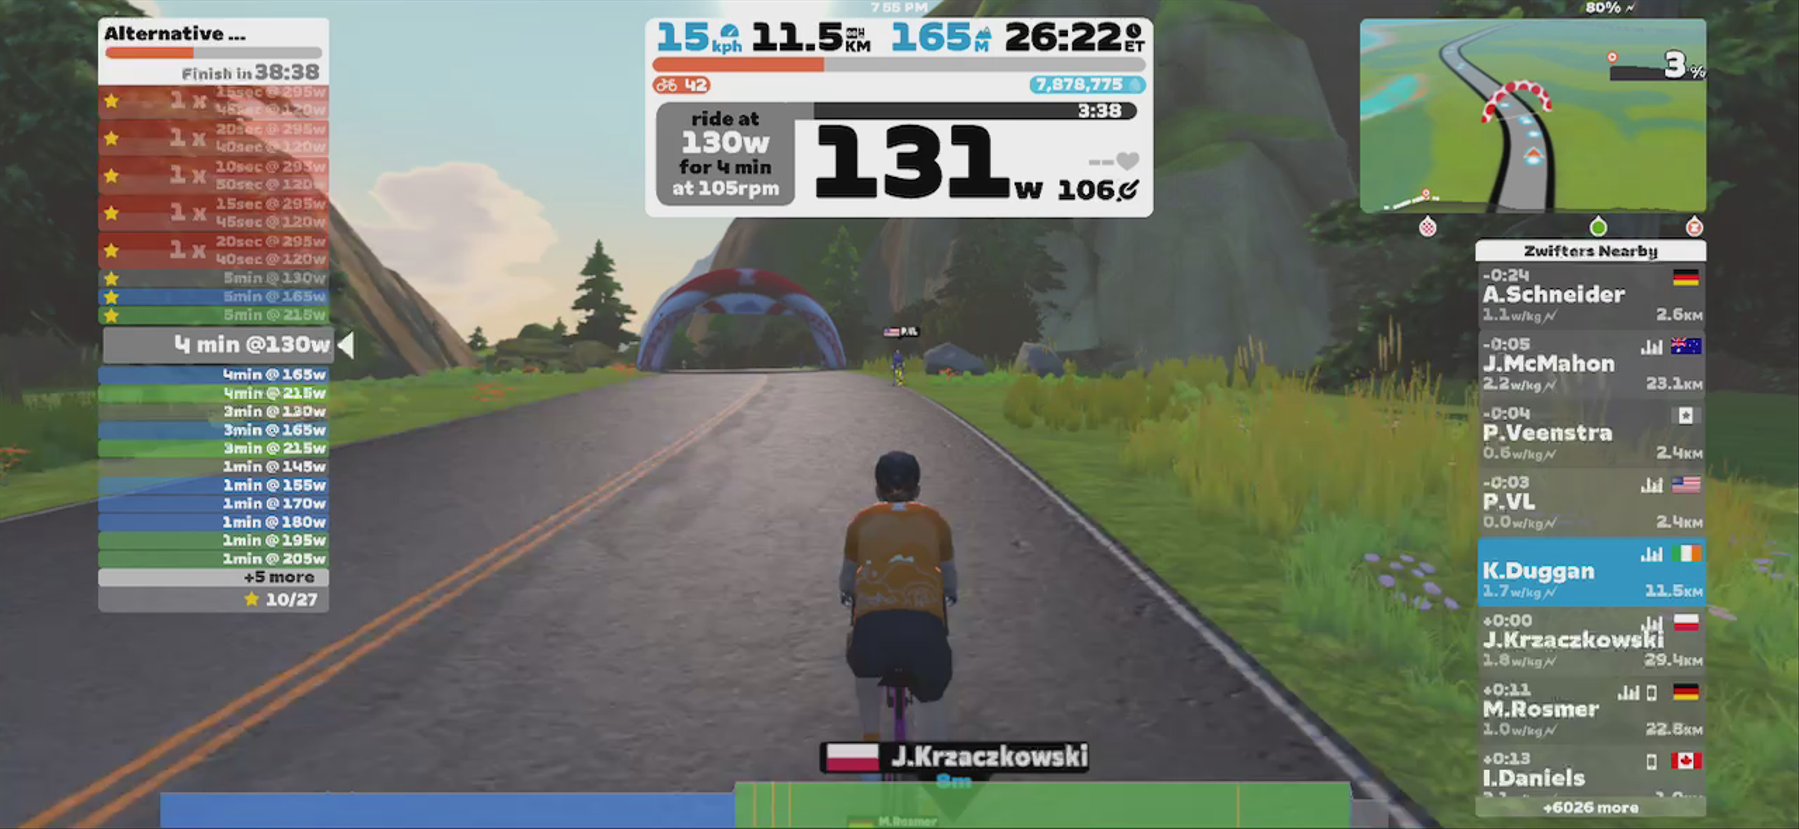 Zwift - Alternative Session - Building Bangs in Watopia